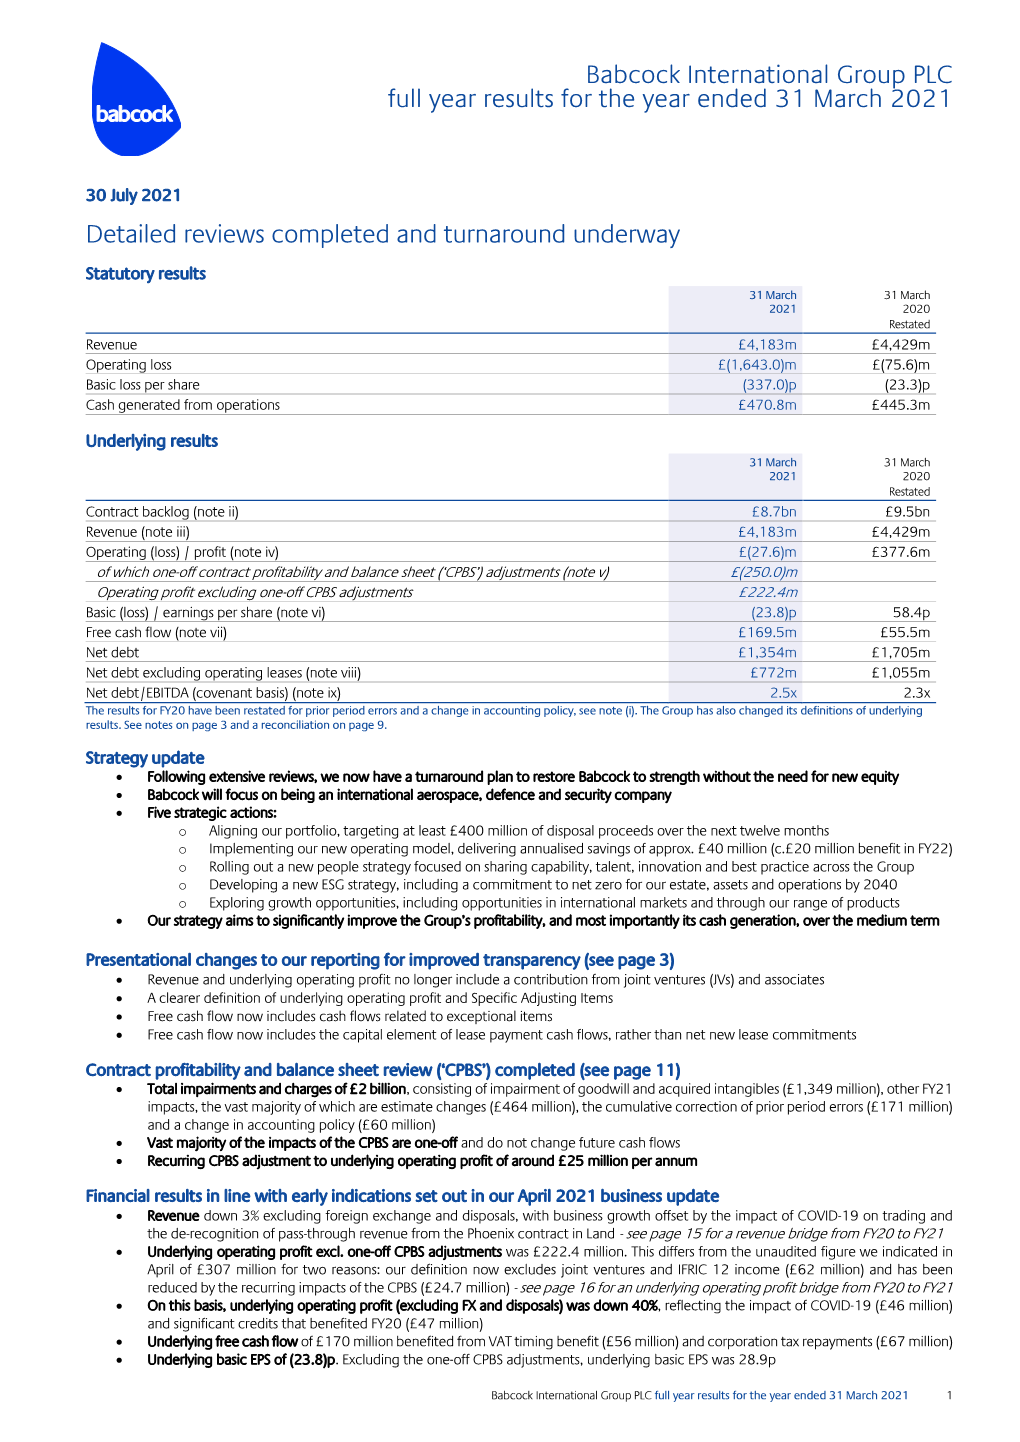 Babcock International Group PLC Full Year Results for the Year Ended 31 March 2021 Detailed Reviews Completed and Turnaround